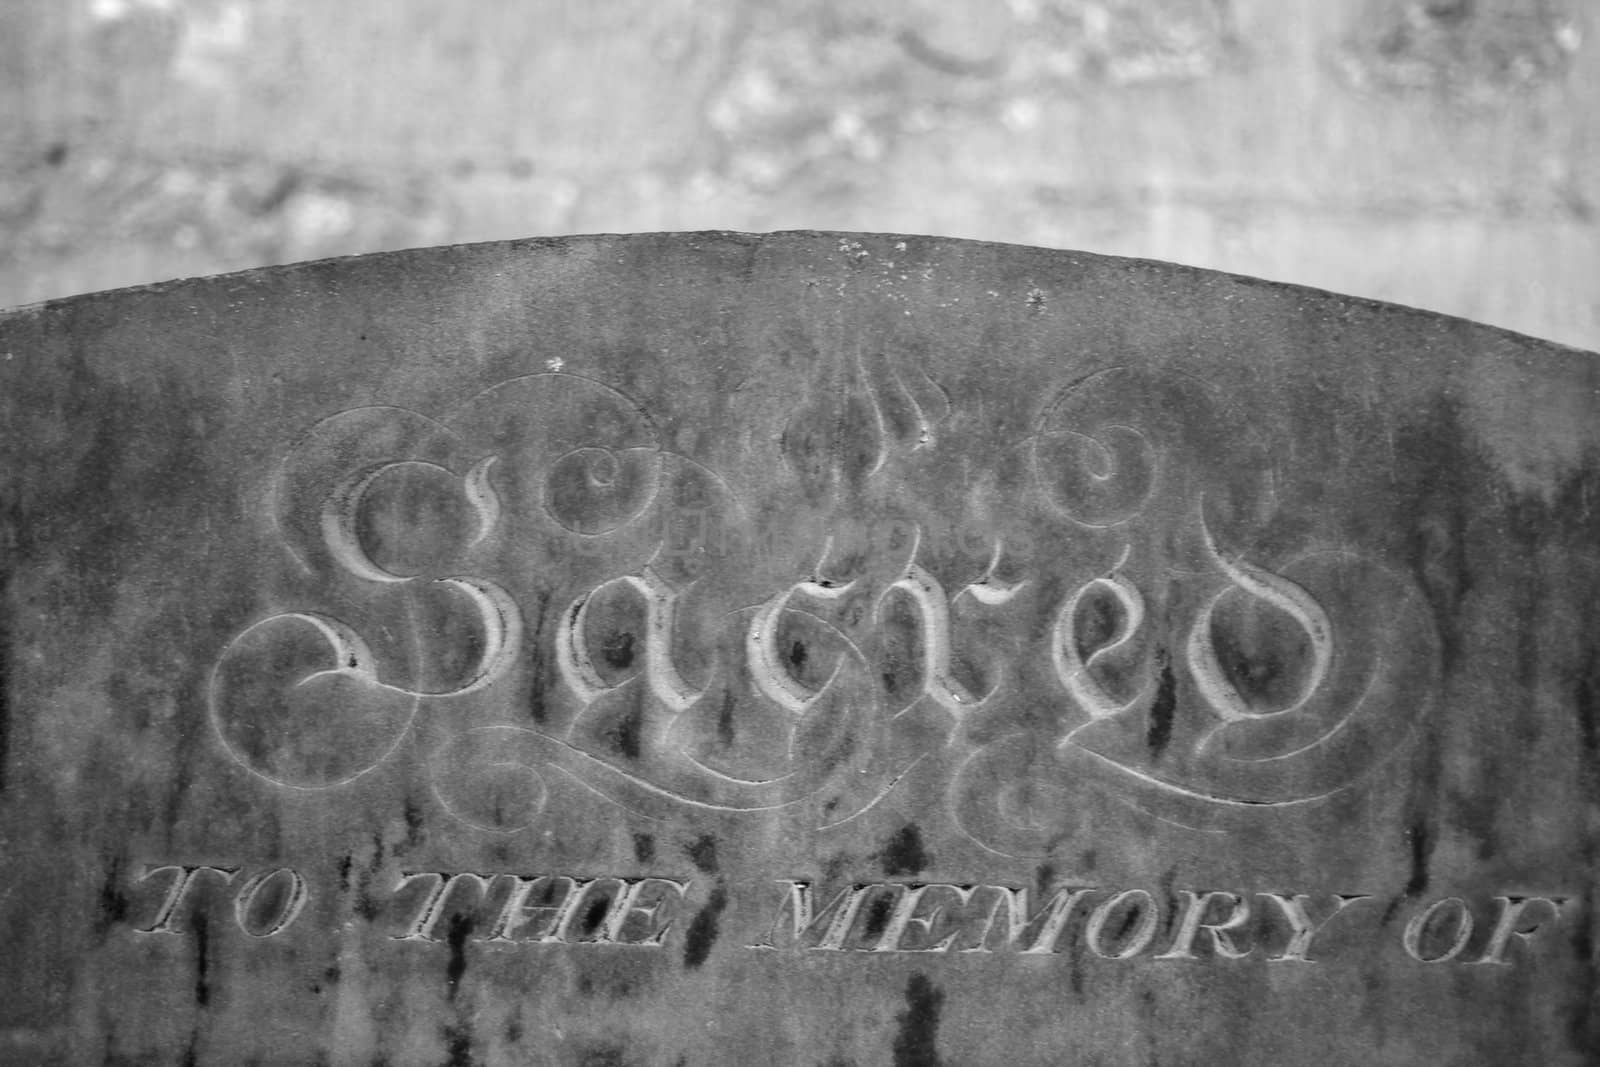 black and white image of a grave stone with the word "sacred to the memory of" lot of stone texture visible